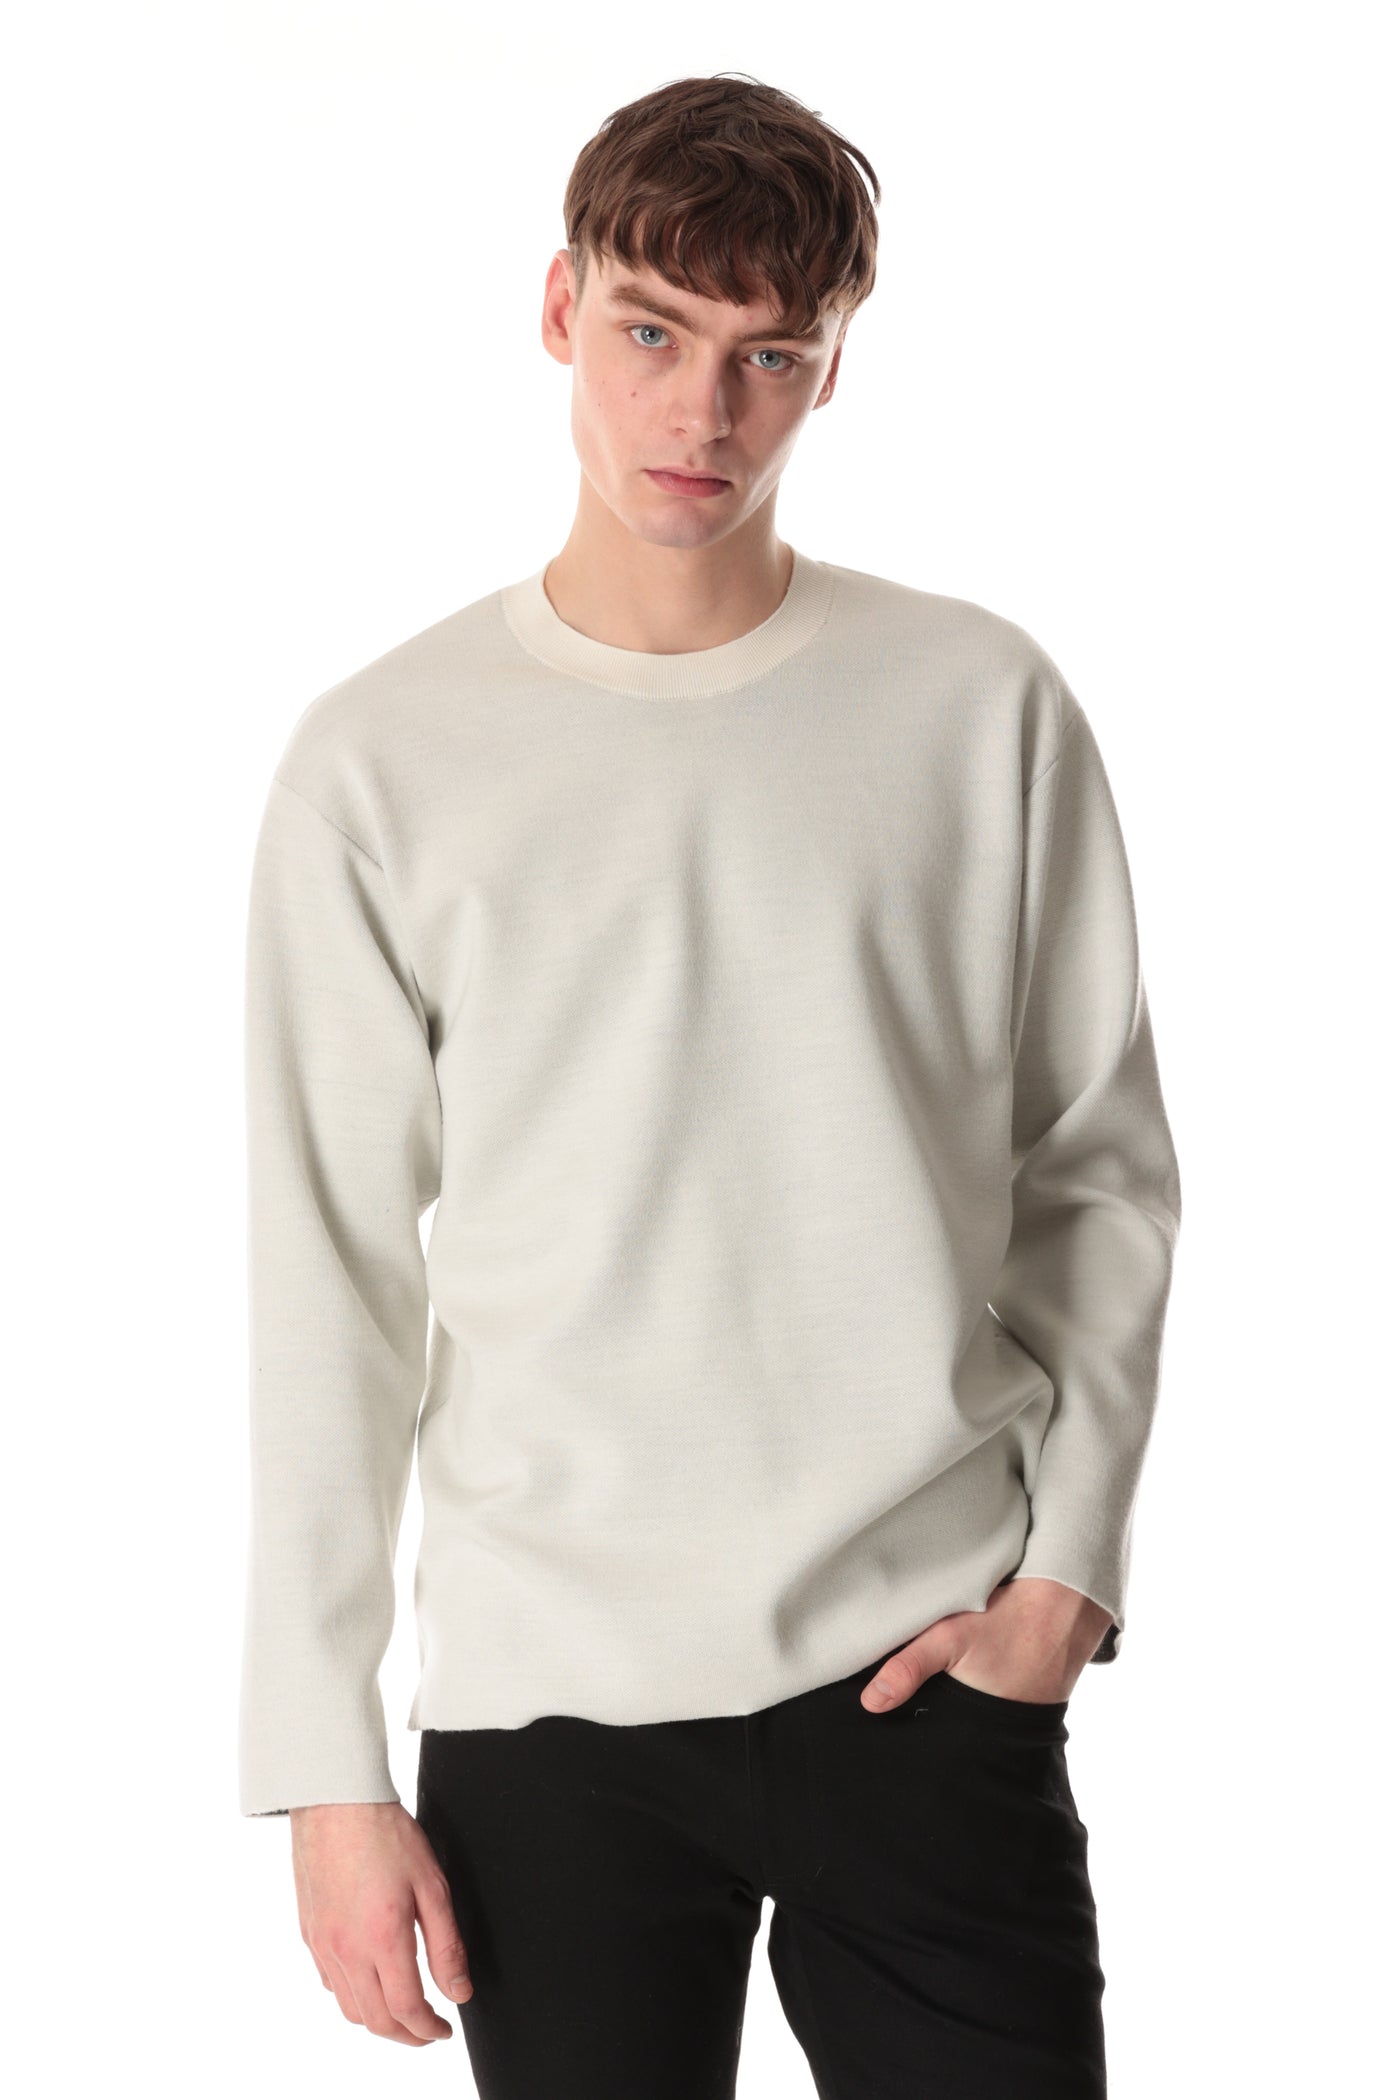 AK32-011 Wool x polyester double face pullover knit